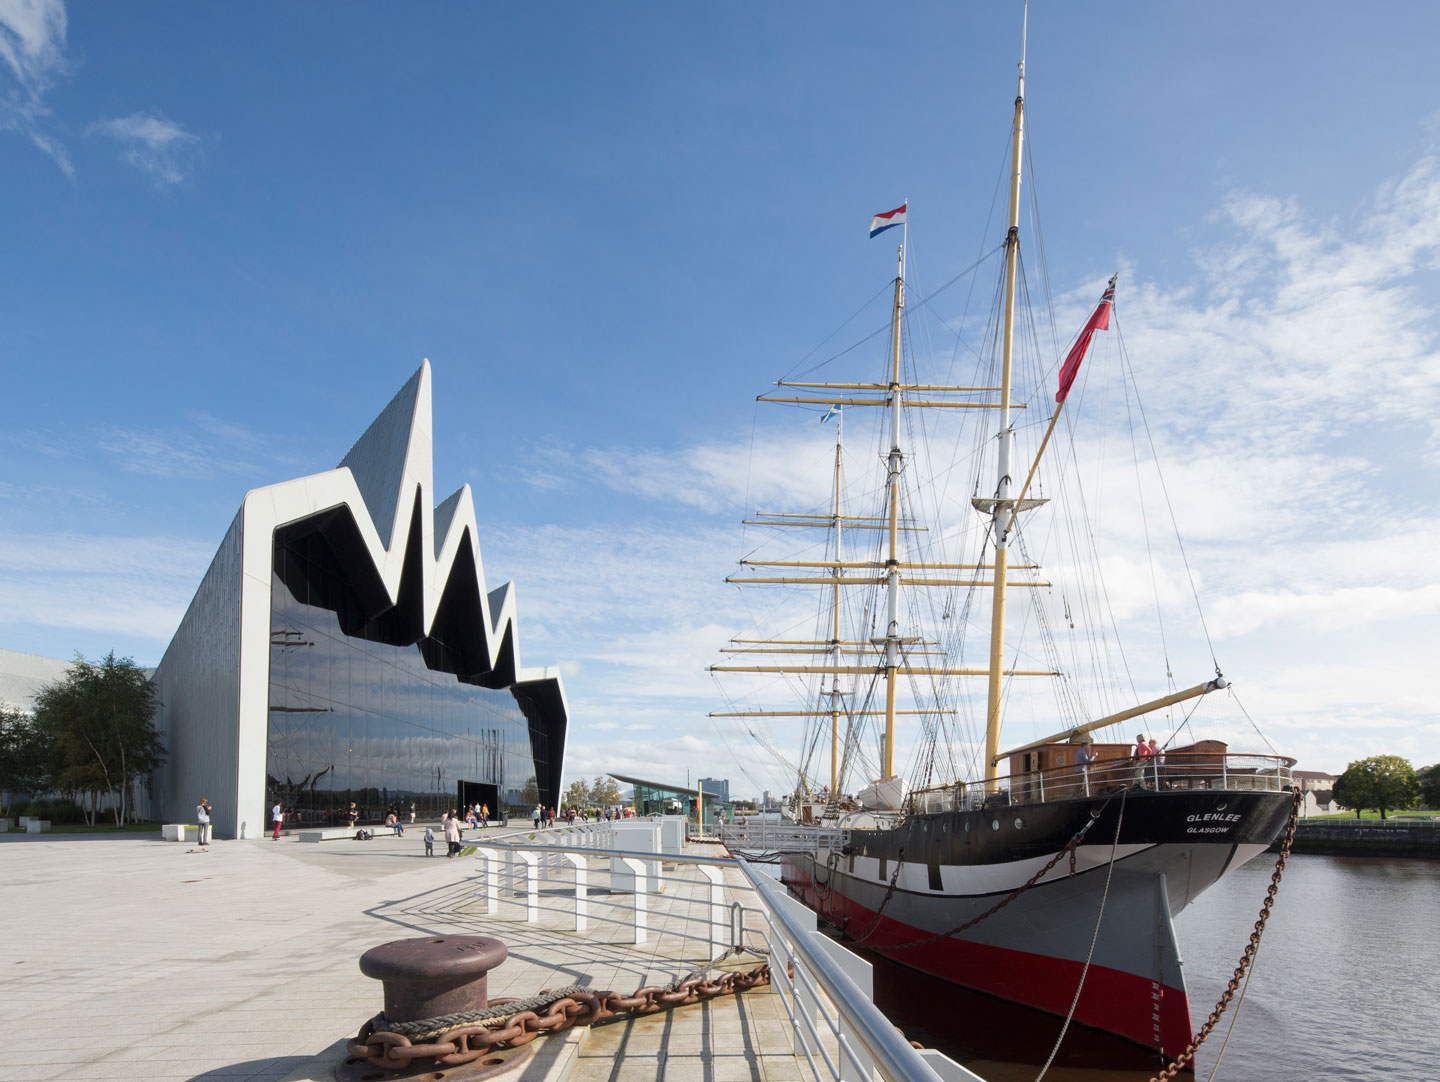 Riverside museum and tall ship in Glasgow